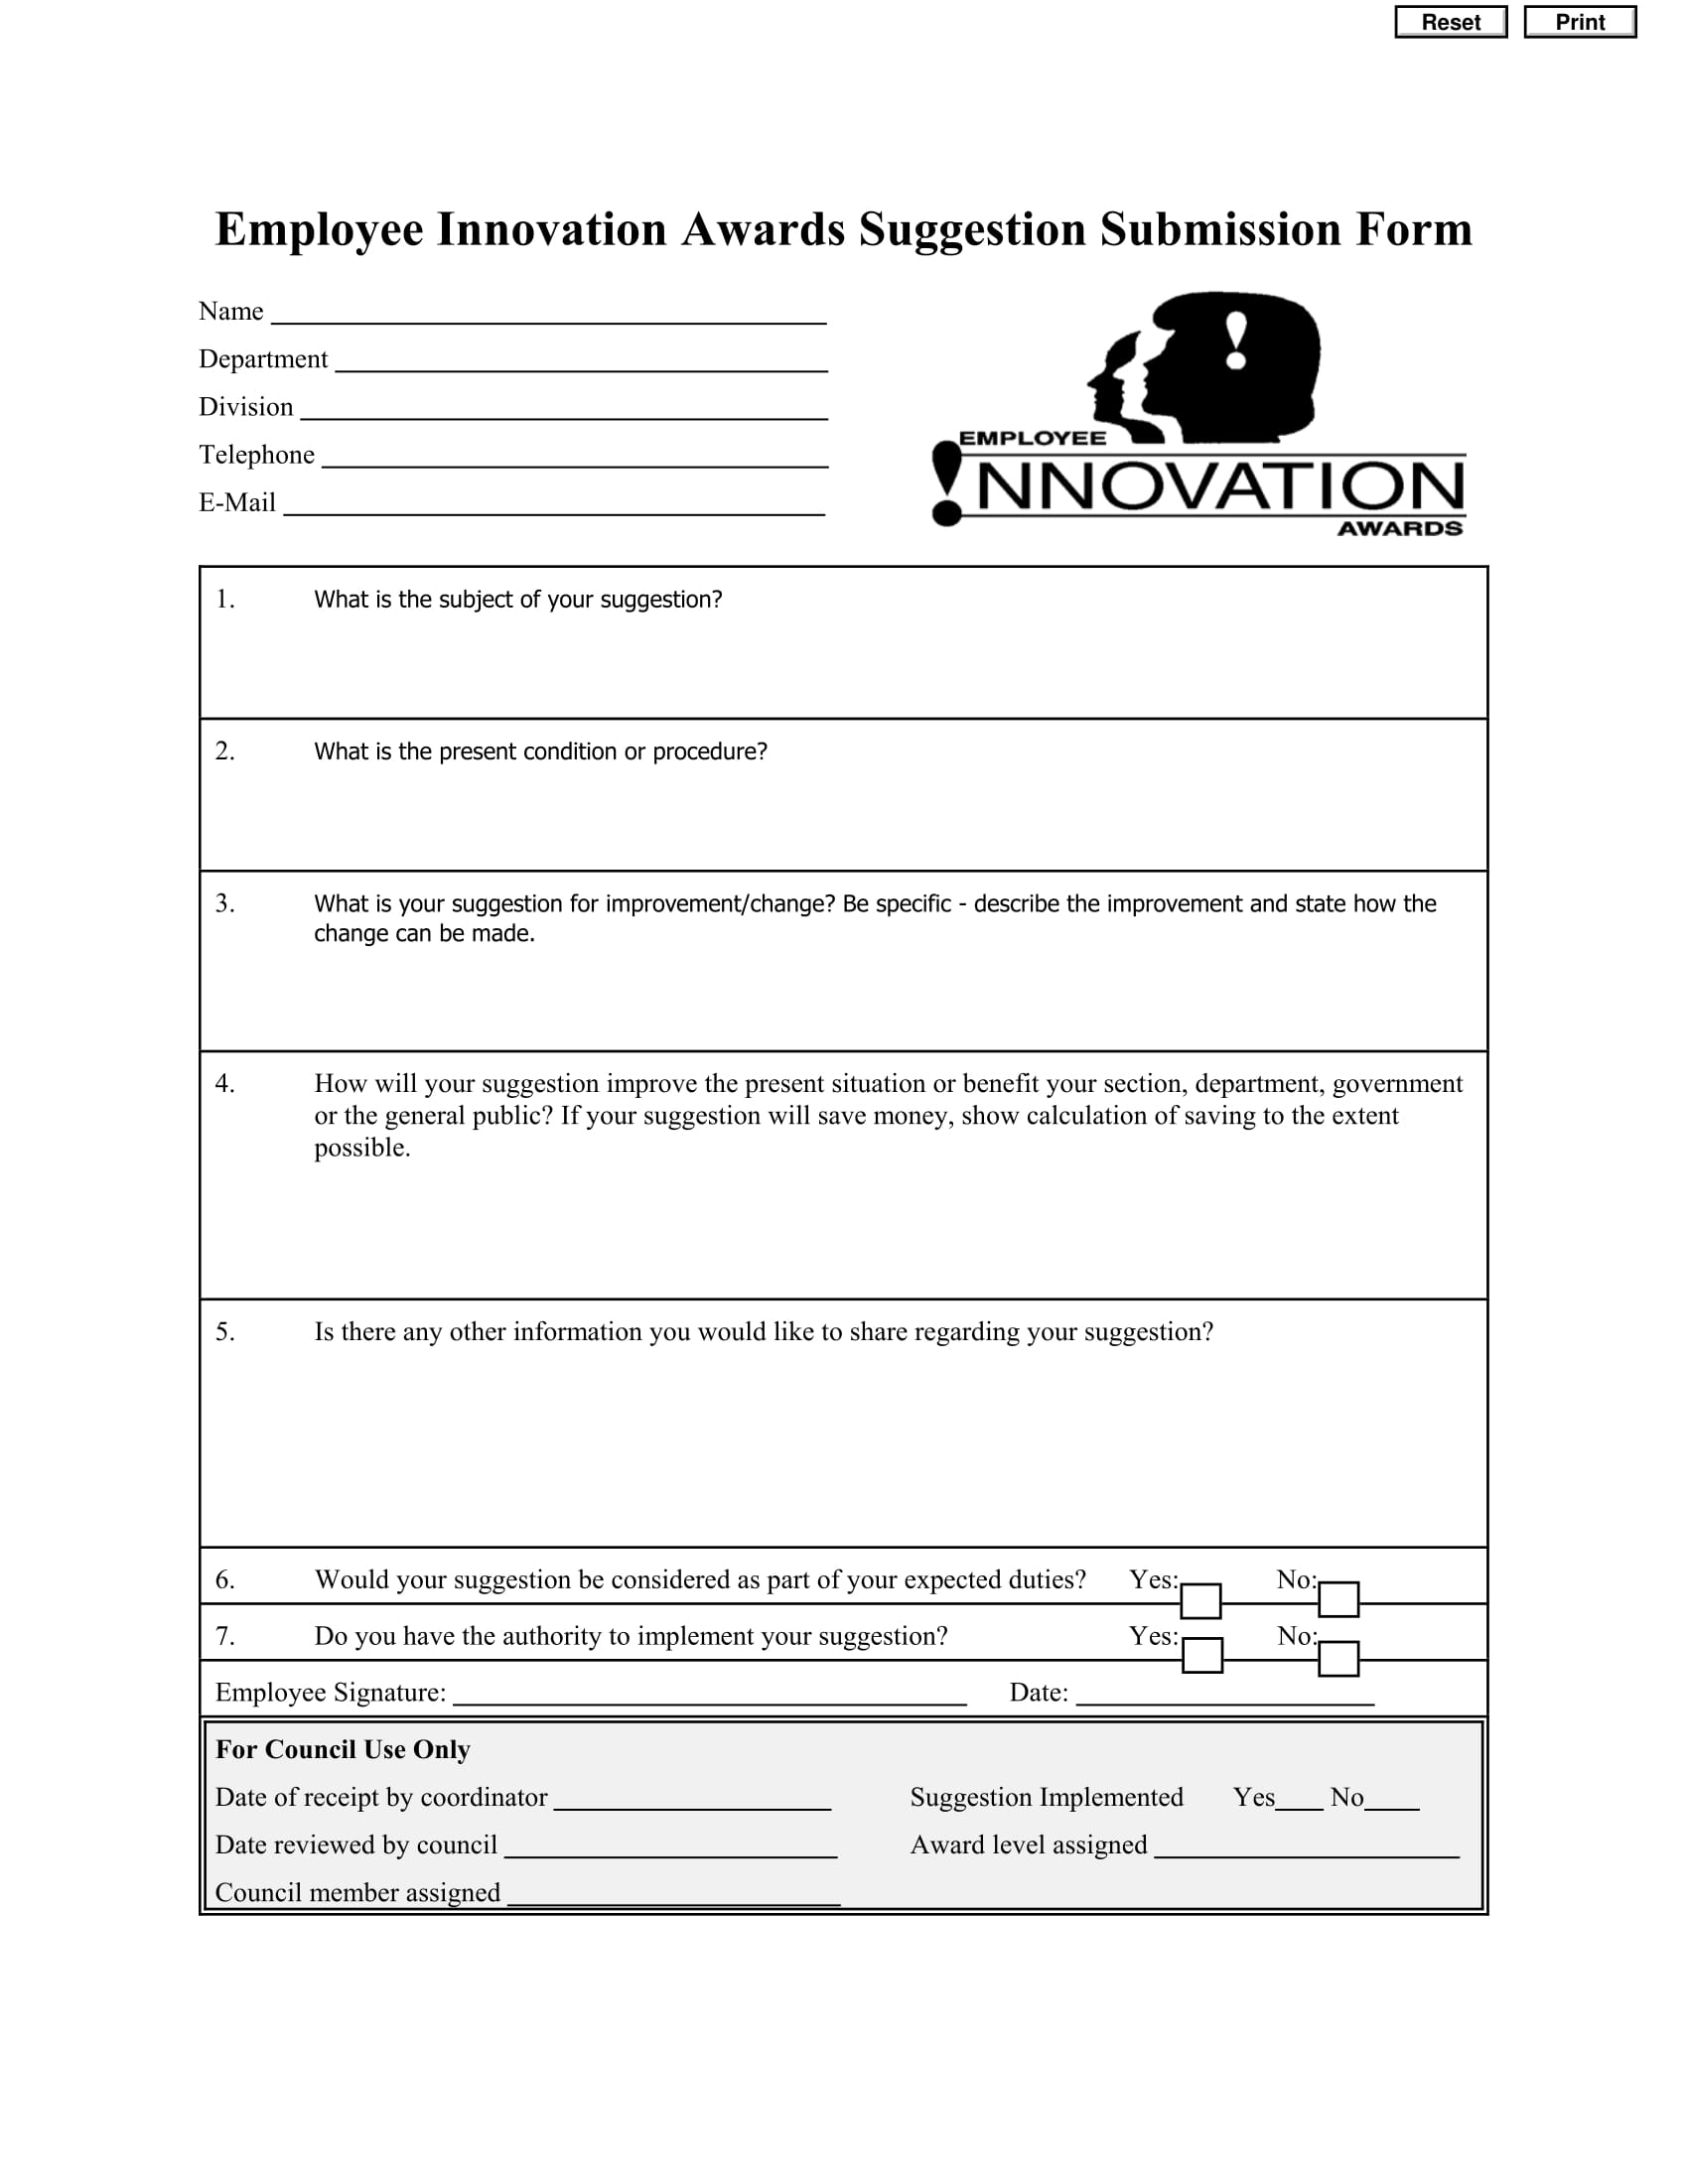 employee innovation awards suggestion submission form 1